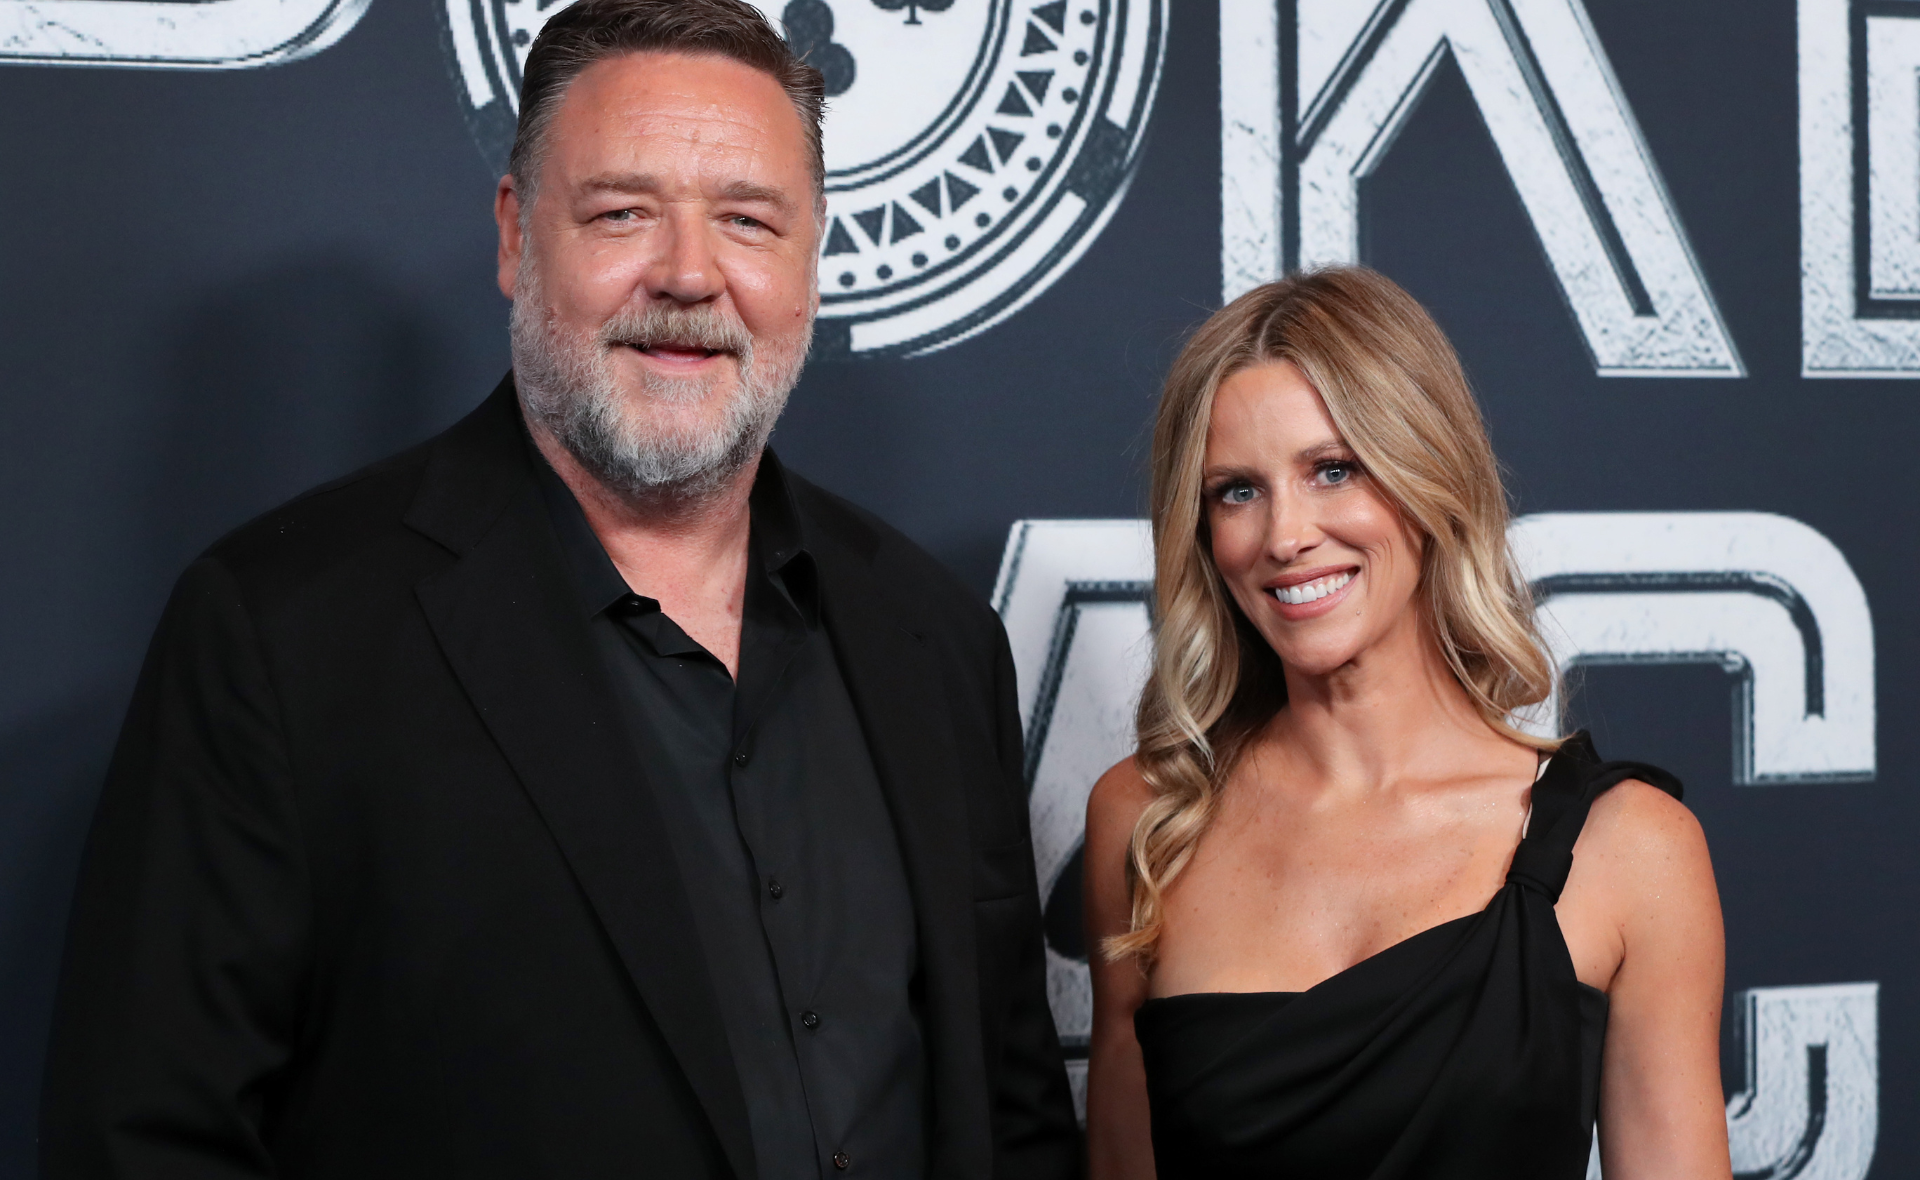 Russell Crowe kicked to the curb by Melbourne restaurant